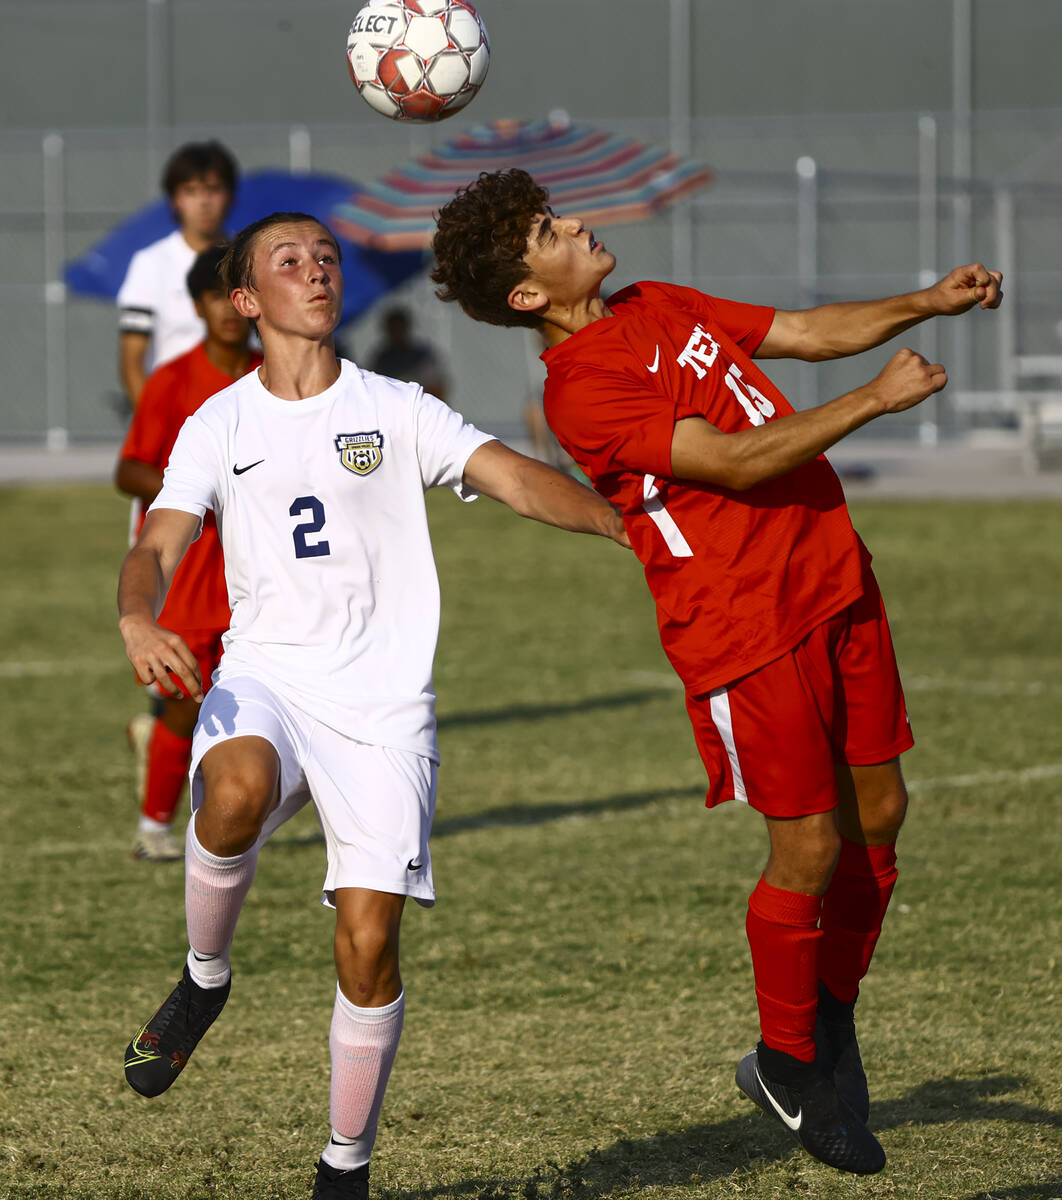 Southeast Career Tech's William Mowery (15) looks to head the ball in front of Spring Valley's ...